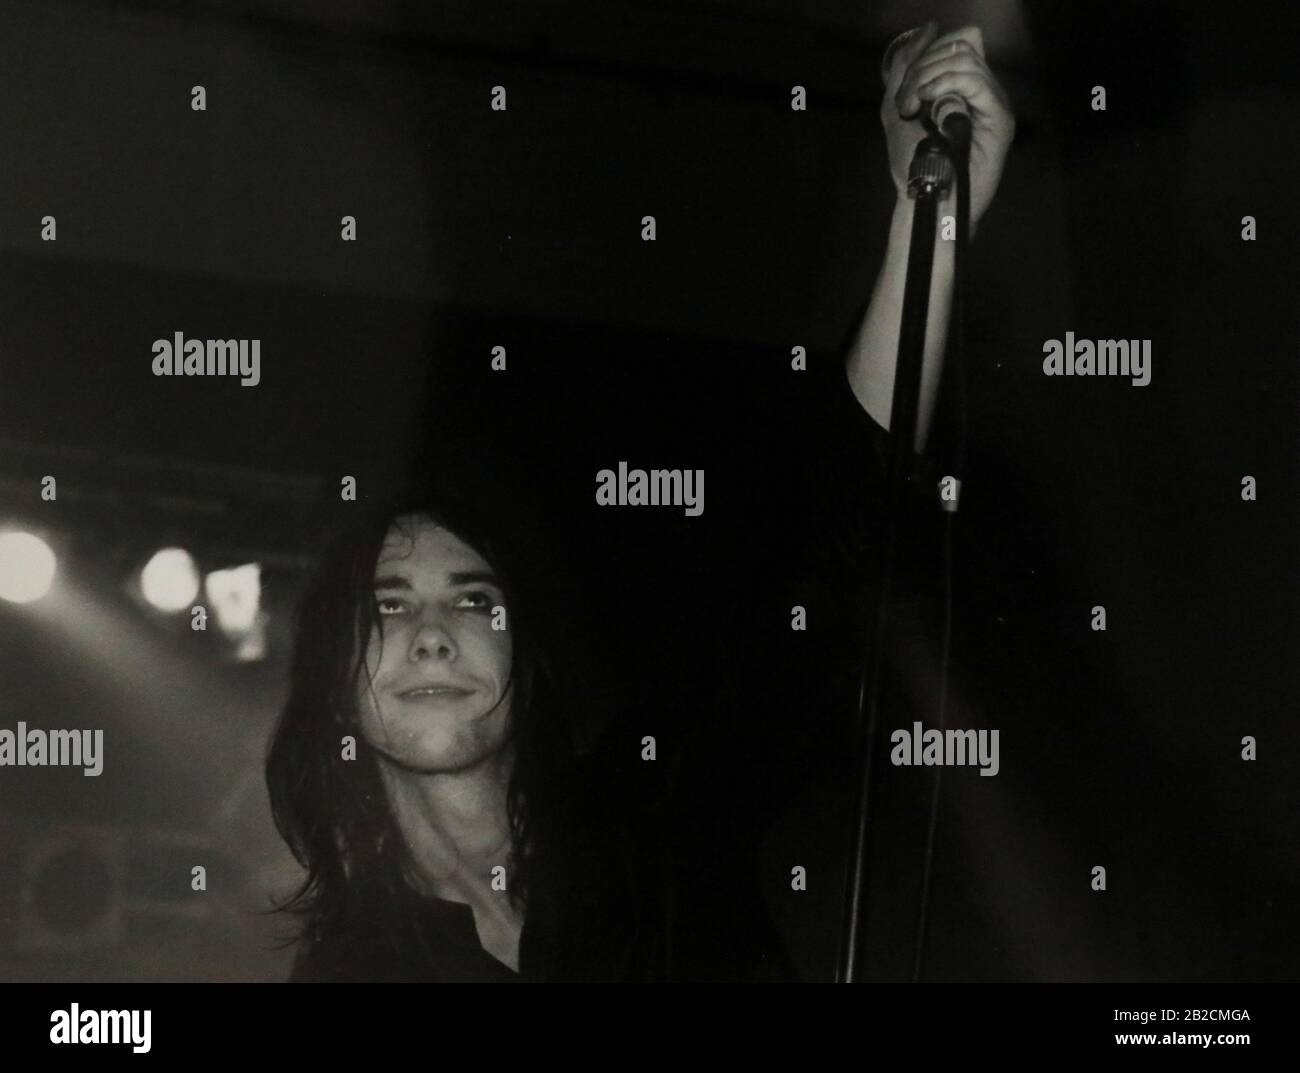 Bobby Gillespie lead singer with Primal Scream performing live at the Event in Brighton.  Photographed by James Boardman Stock Photo